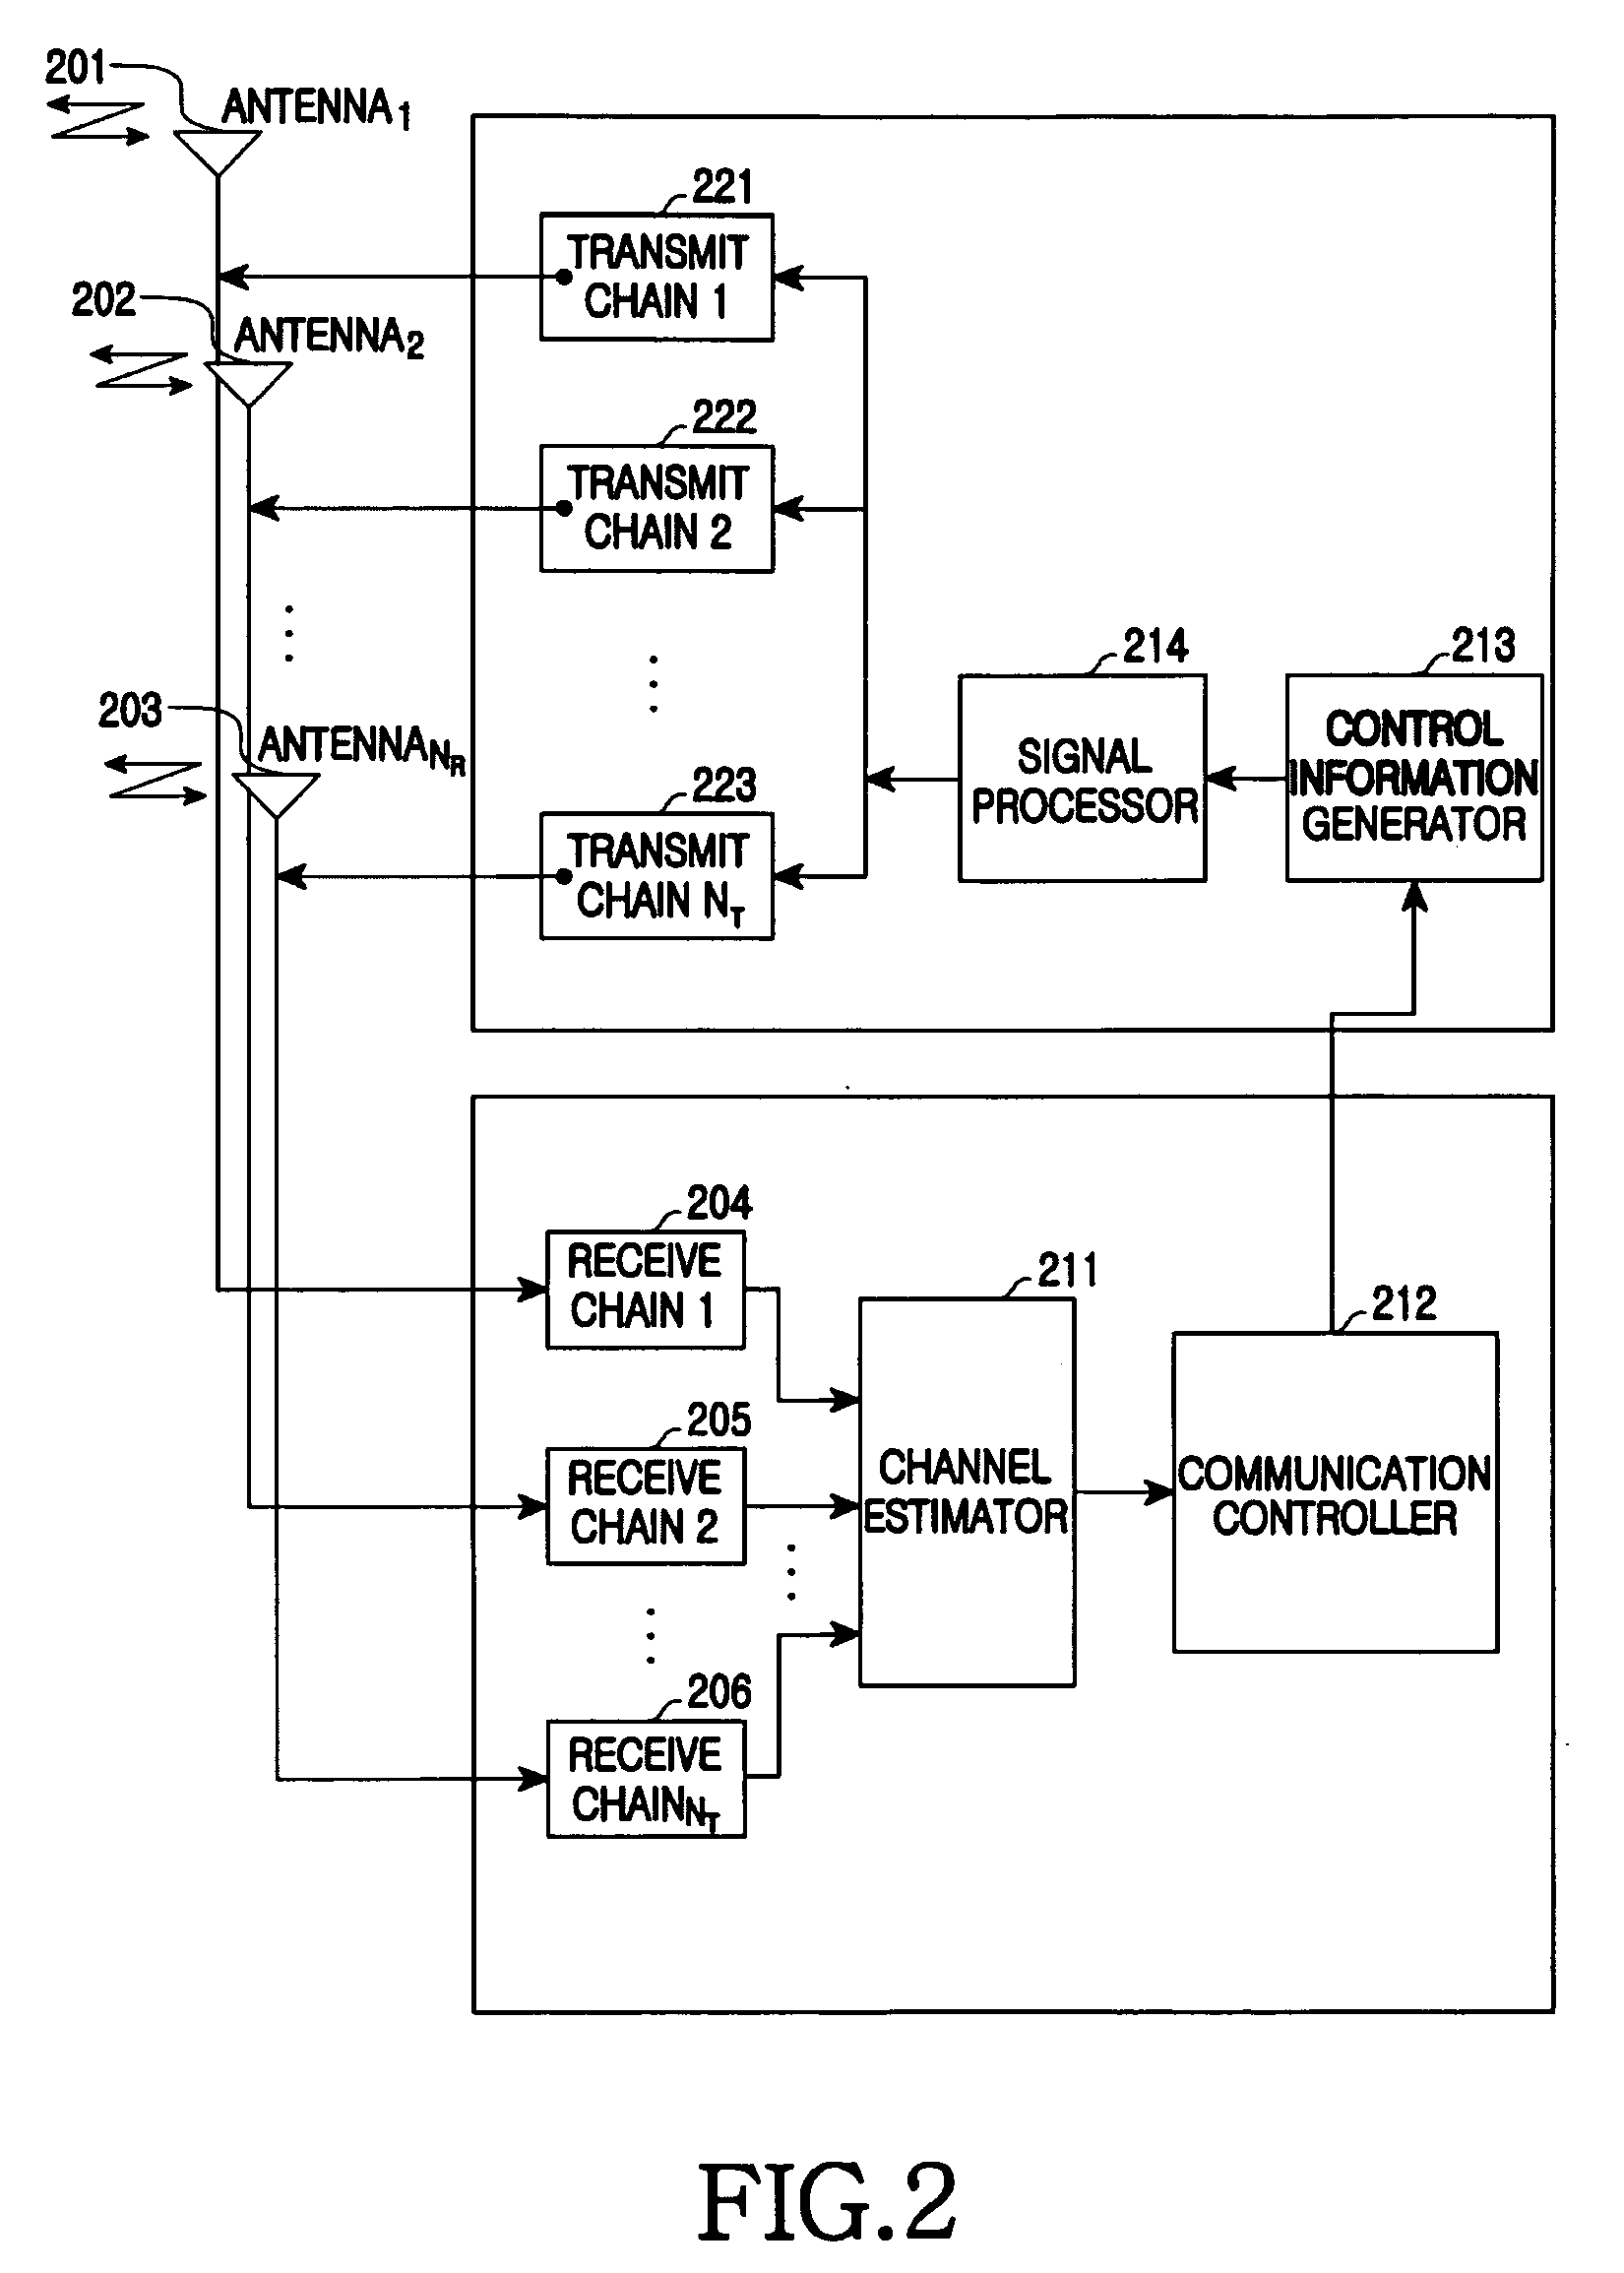 Apparatus and method for uplink beamforming and space-division multiple access (SDMA) in multiple input multiple output (MIMO) wireless communication systems